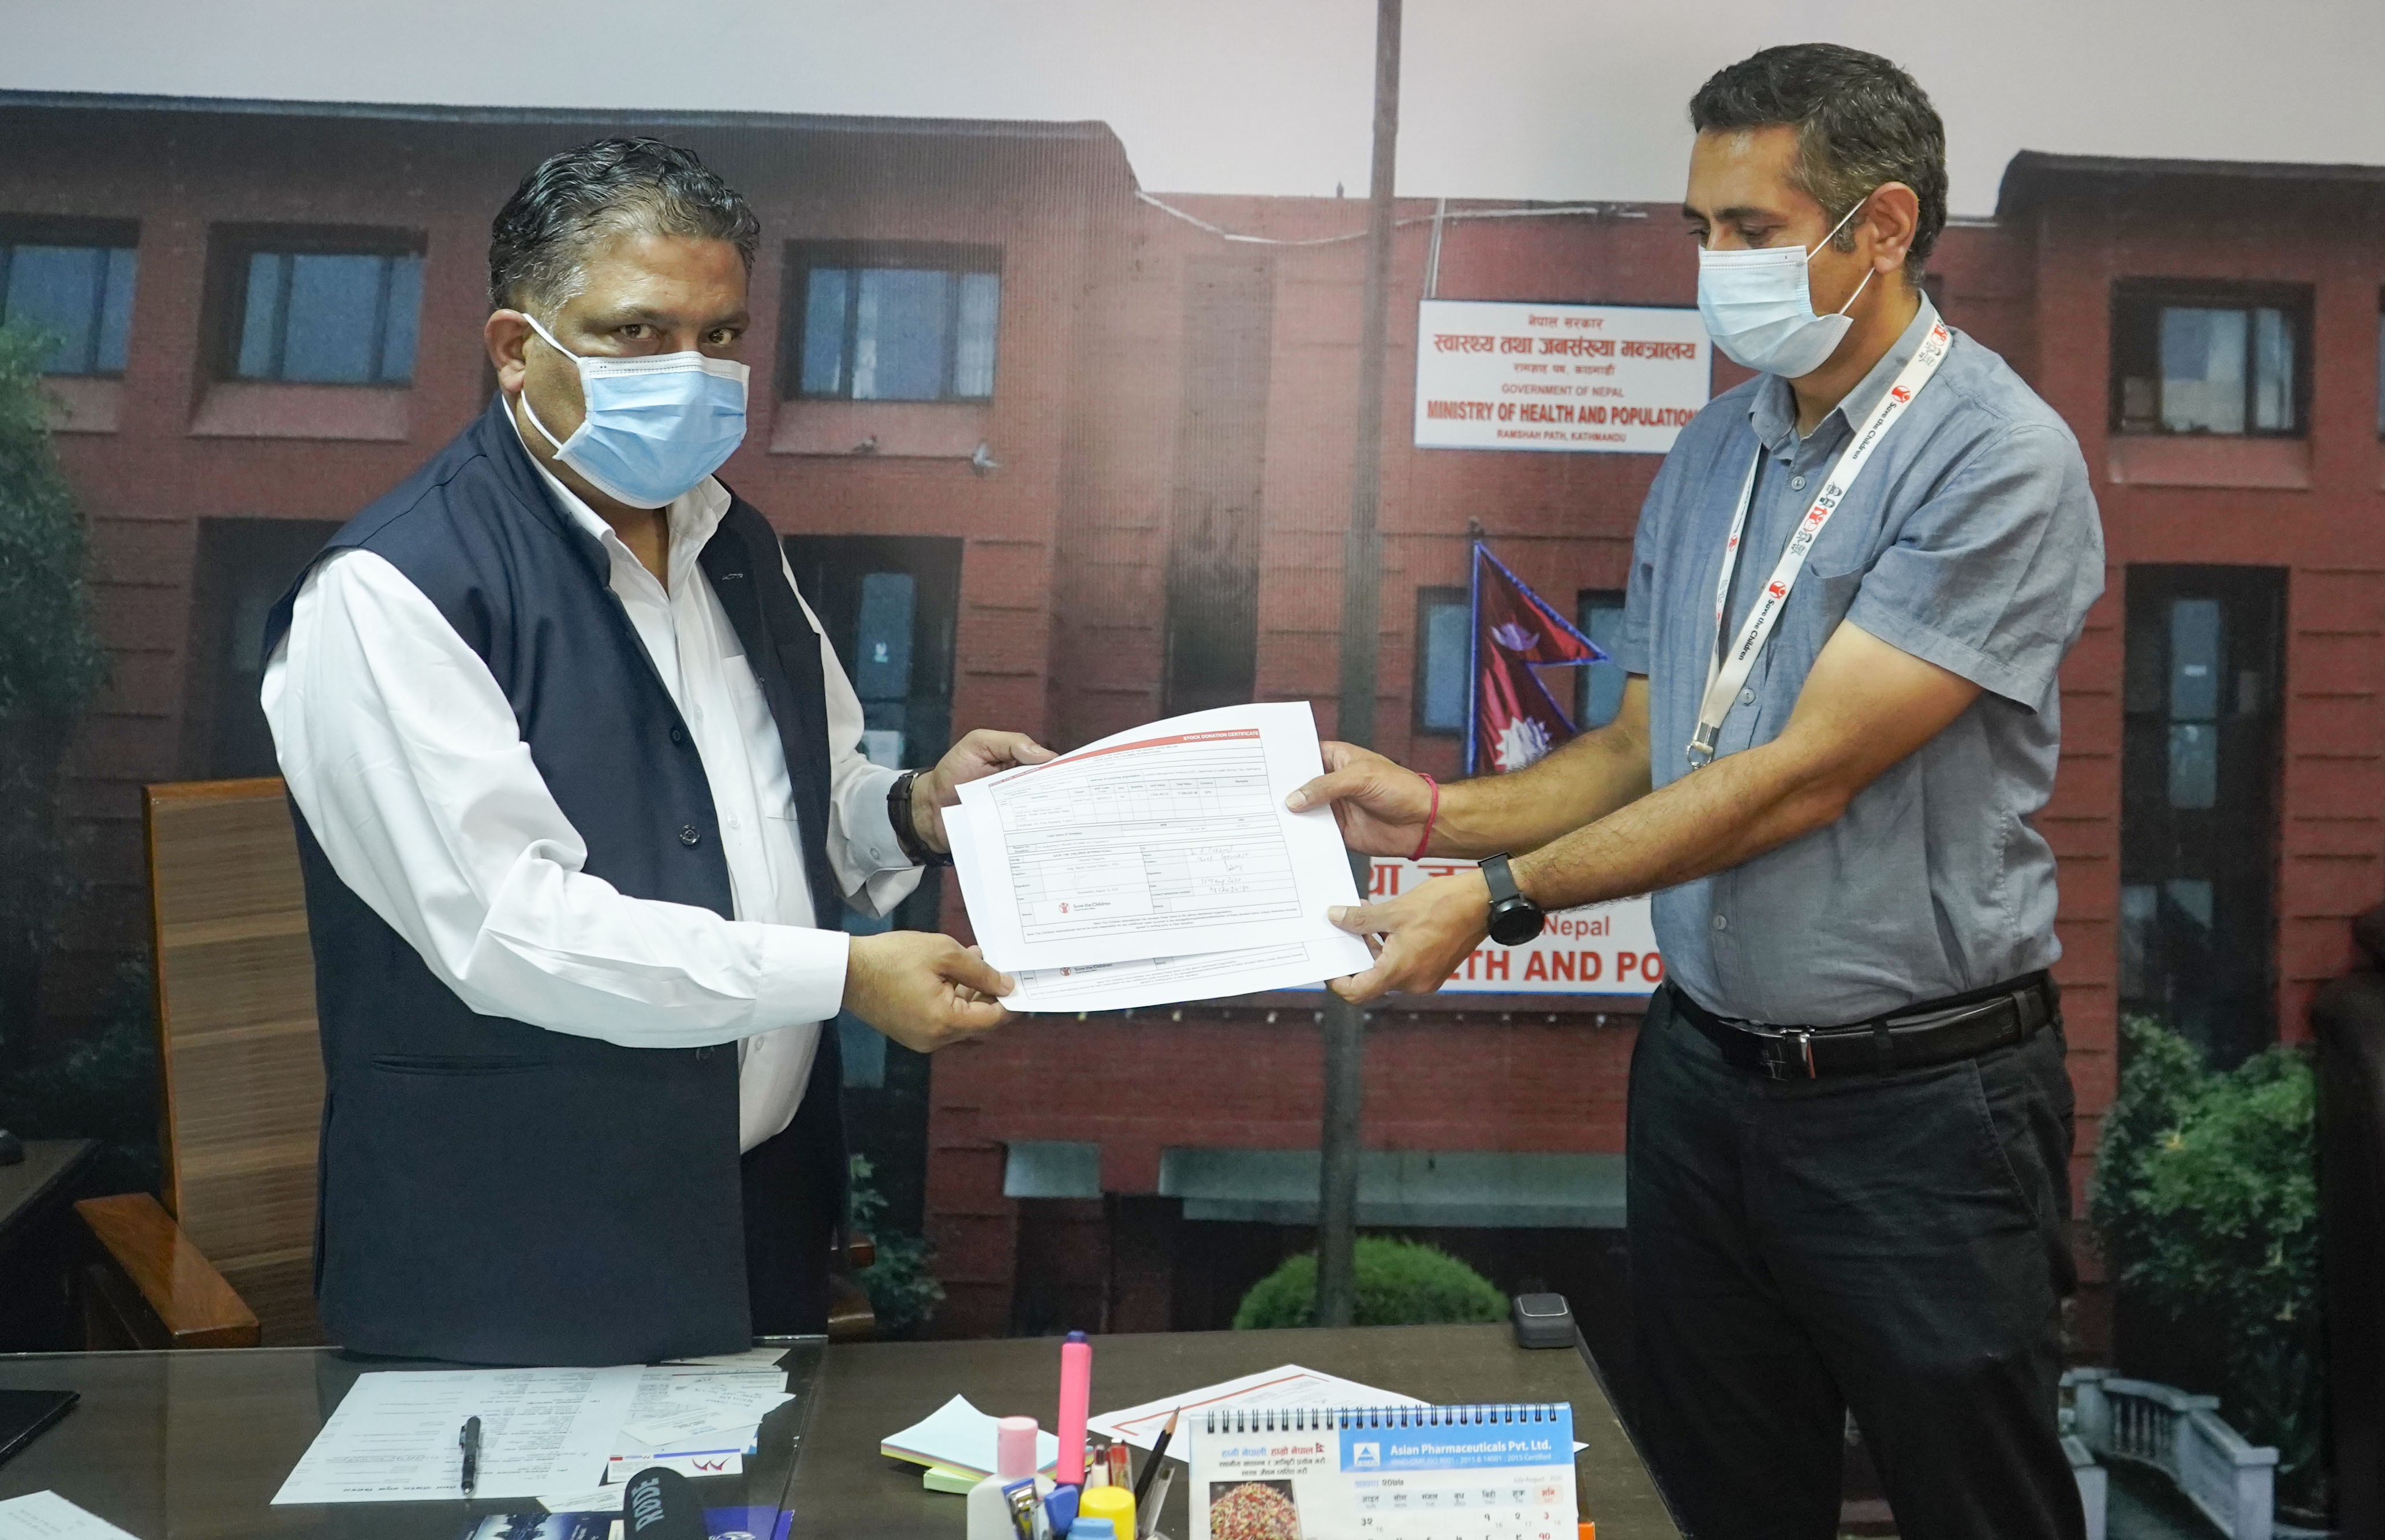 A representative from Save the Children hands over equipments to government official as a support to COVID-19 response. Courtesy: Save the Children